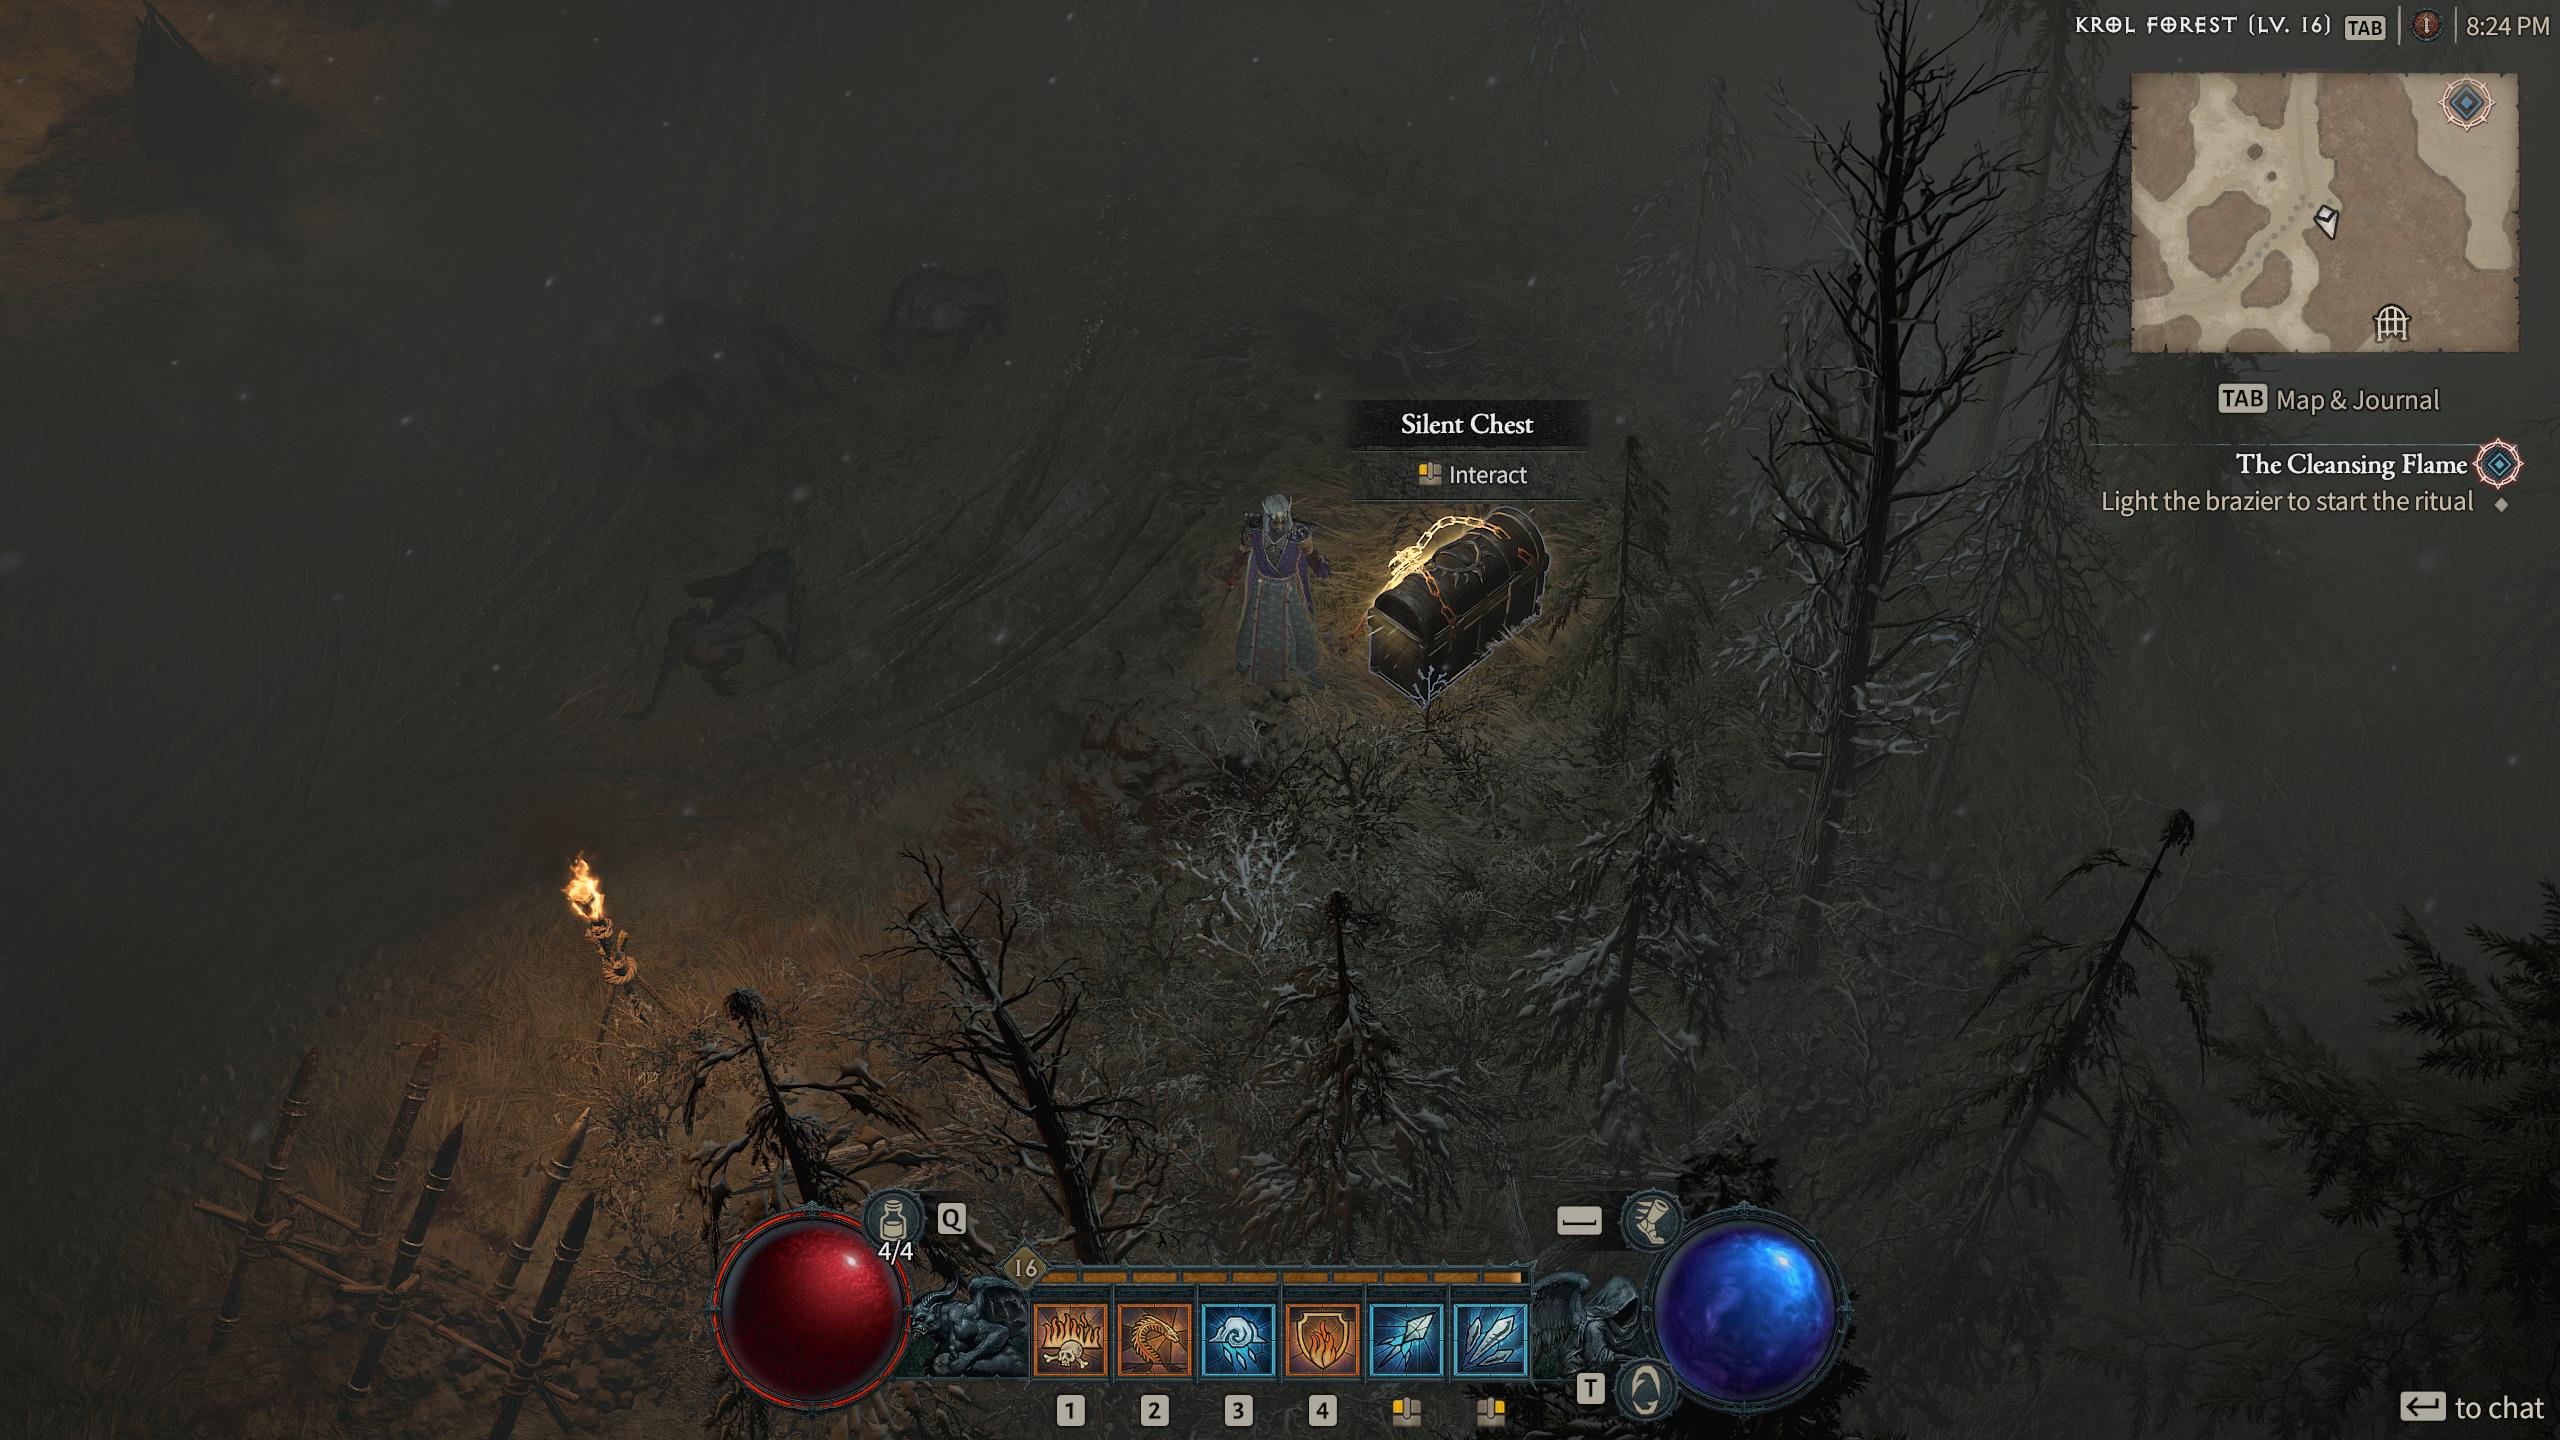 A Diablo 4 player next to a Silent Chest.